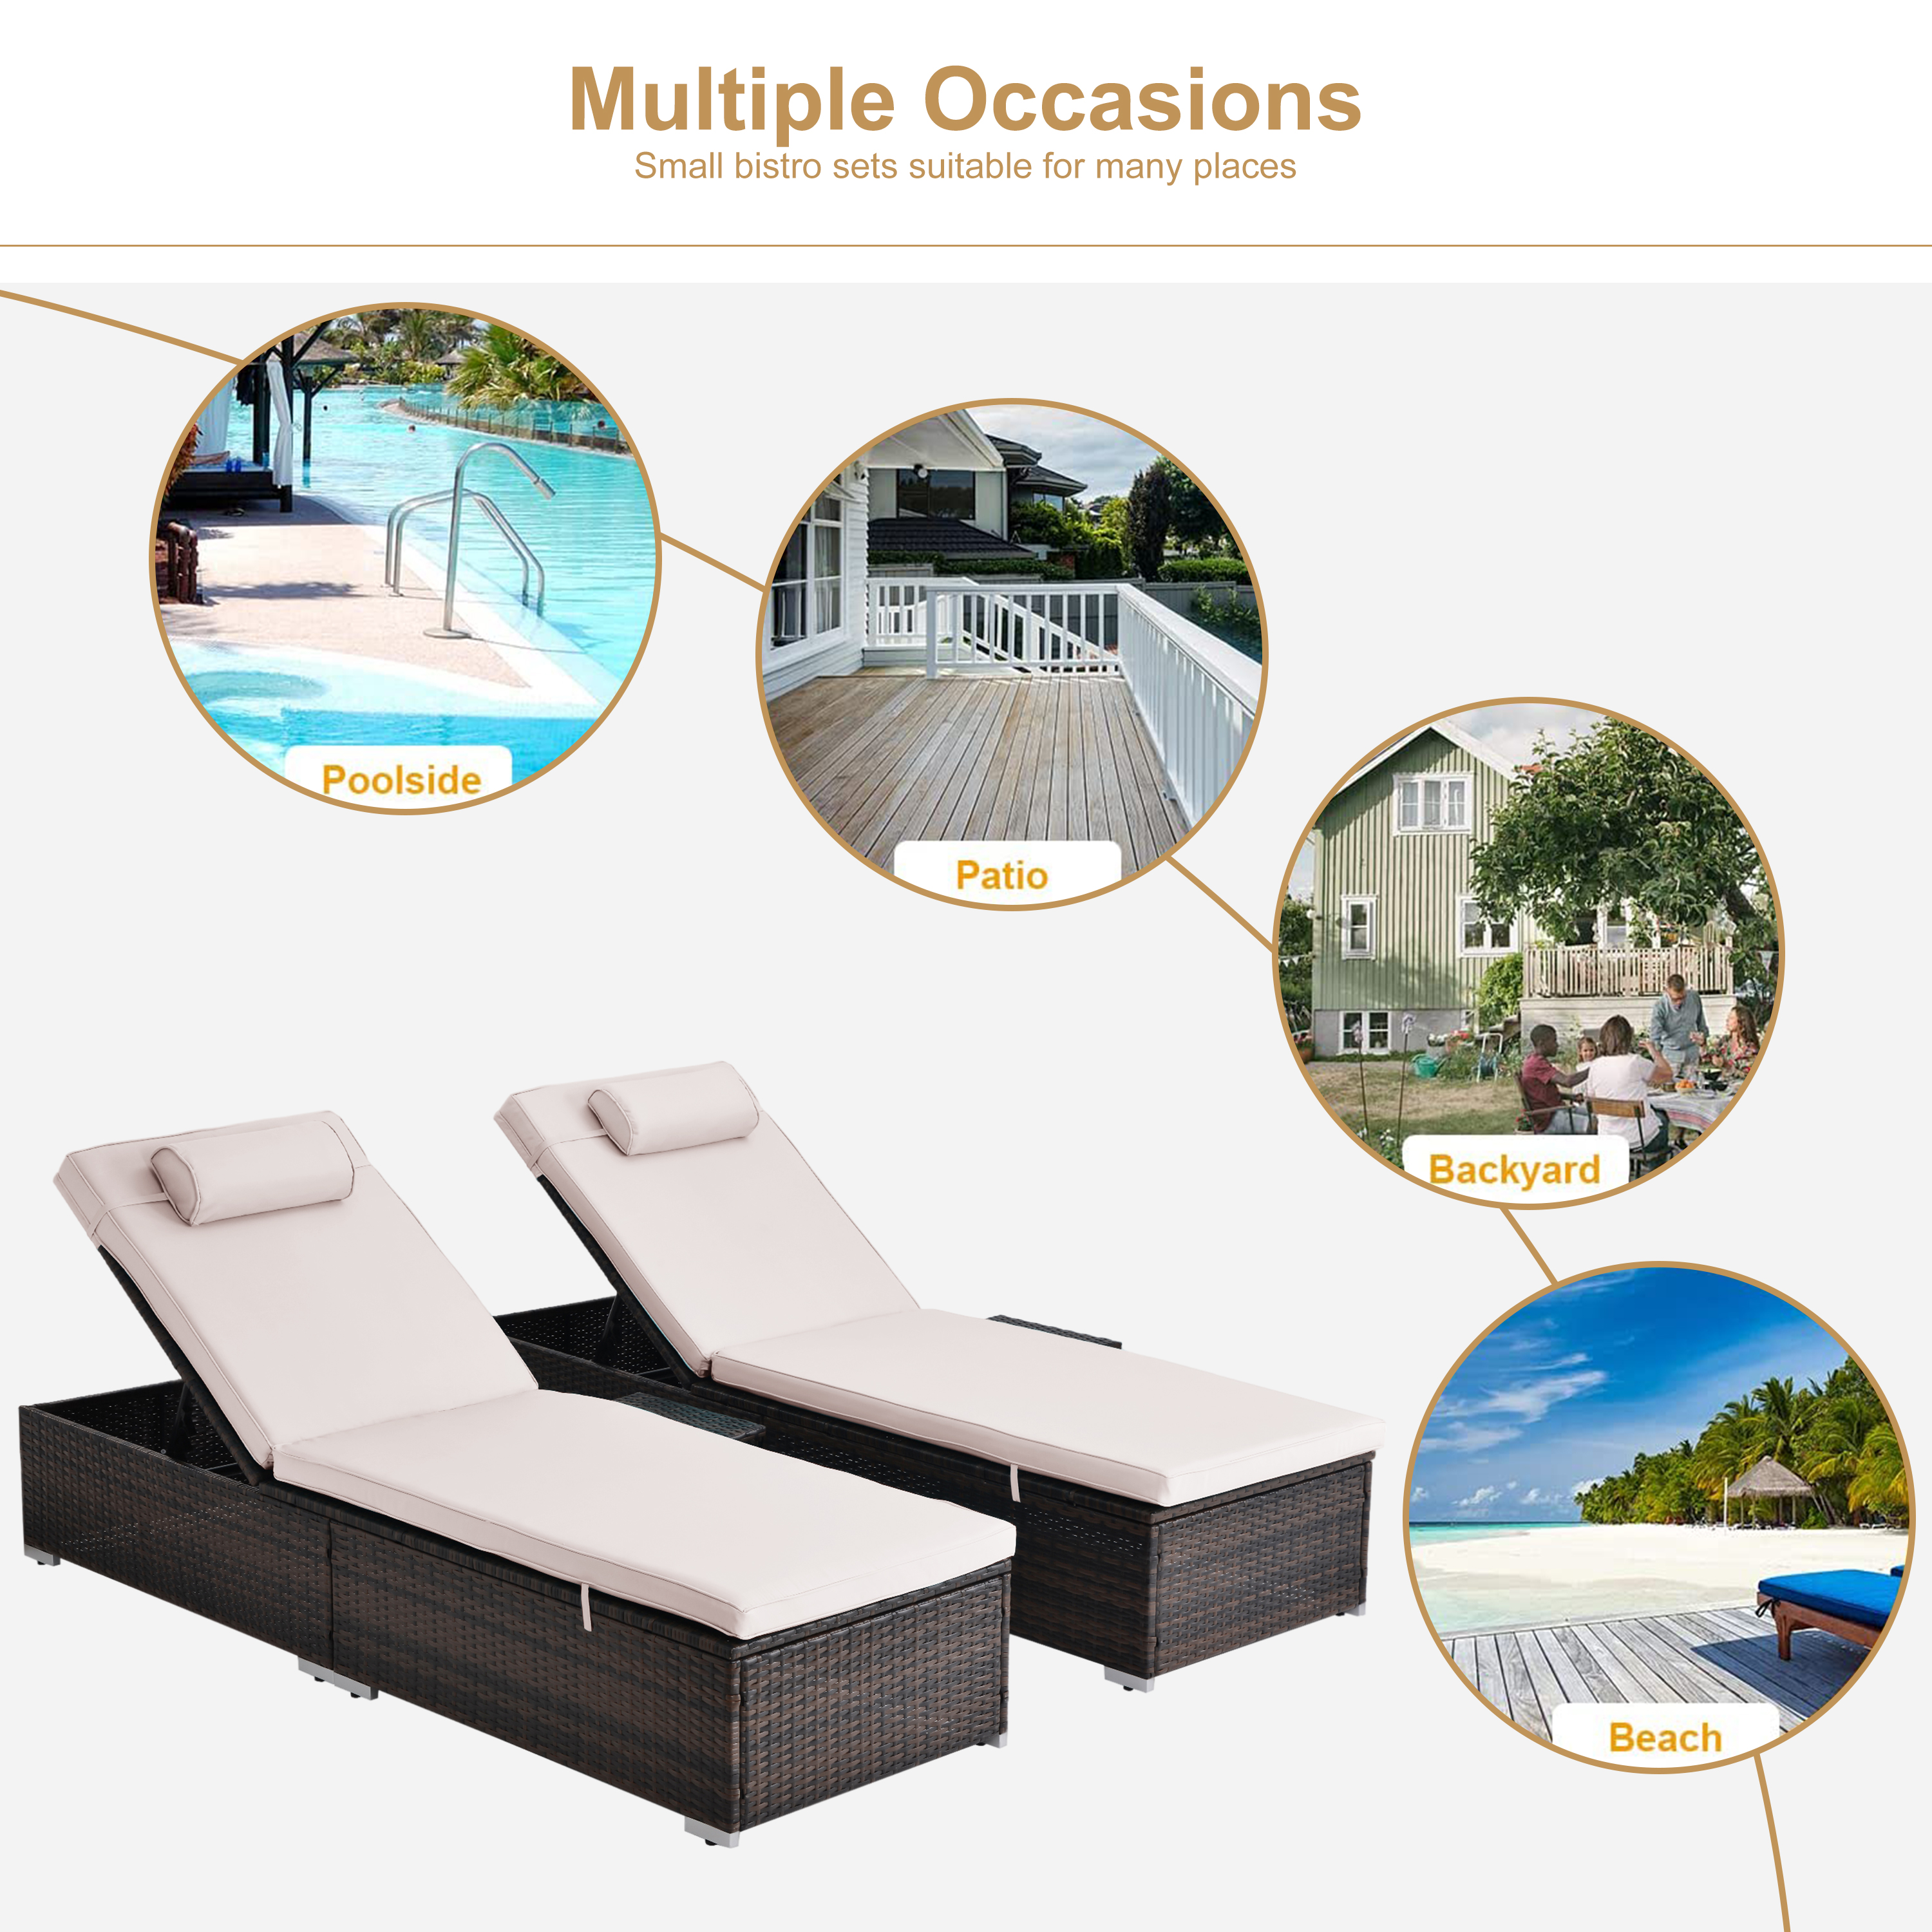 Segmart Outdoor Patio Chaise Lounge Chairs Furniture Set, PE Rattan Wicker Beach Pool Lounge Chair with Side Table, Adjustable 5 Position, Reclining Chaise Chairs, Beige, SS2350 - image 4 of 8